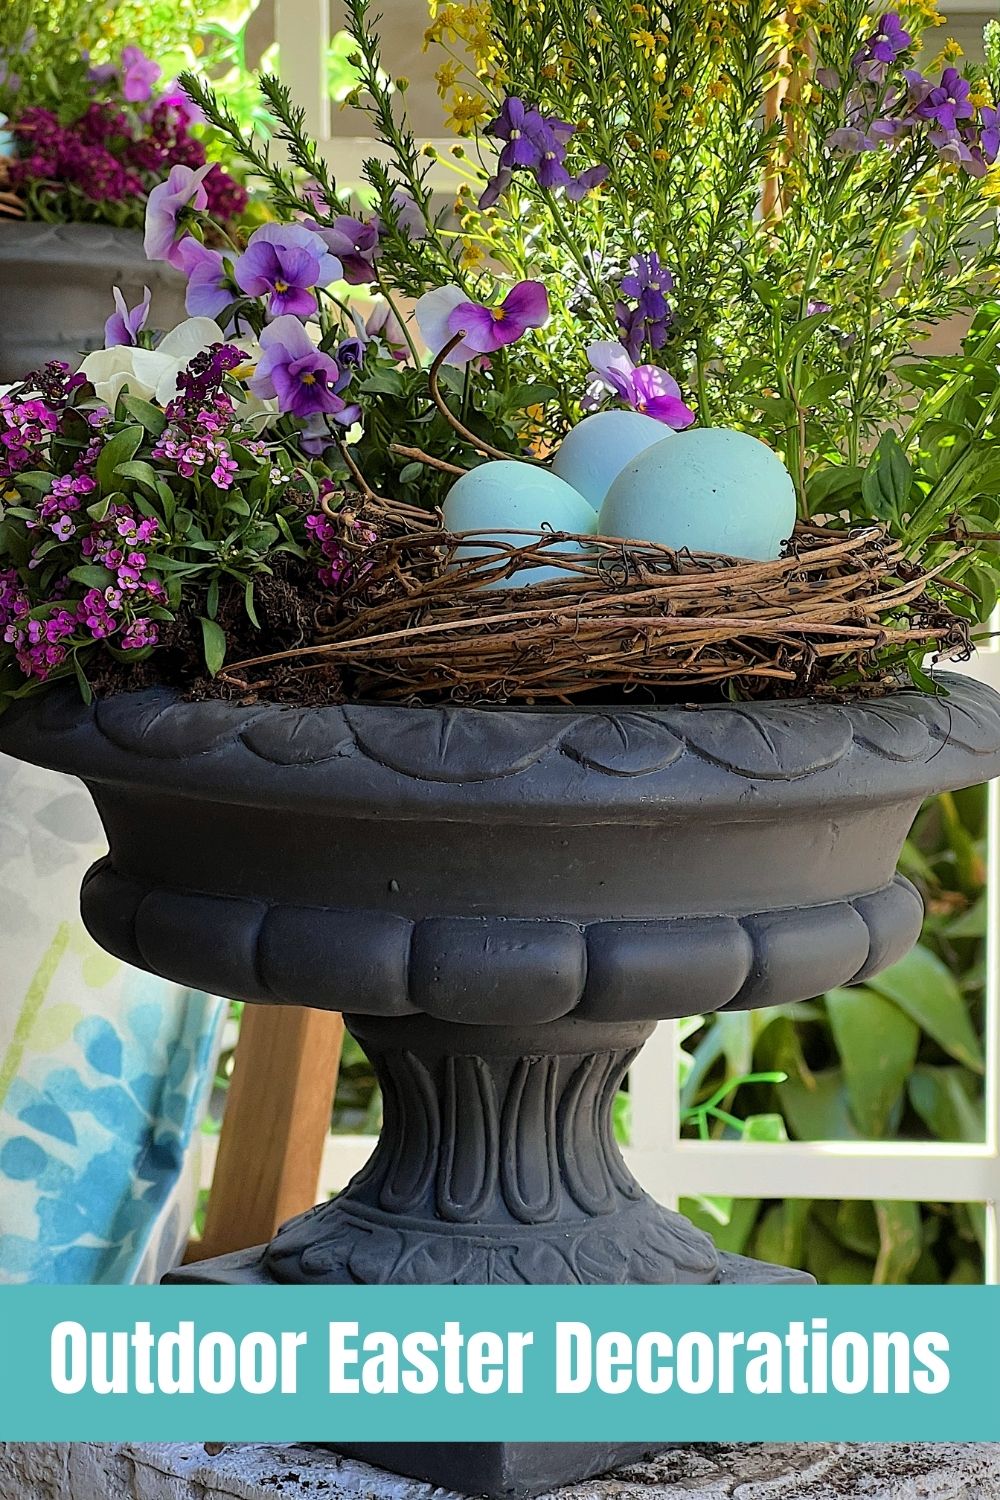 I made some new outdoor Easter decorations for our porch. I made my own footed planters and I love how they came out.